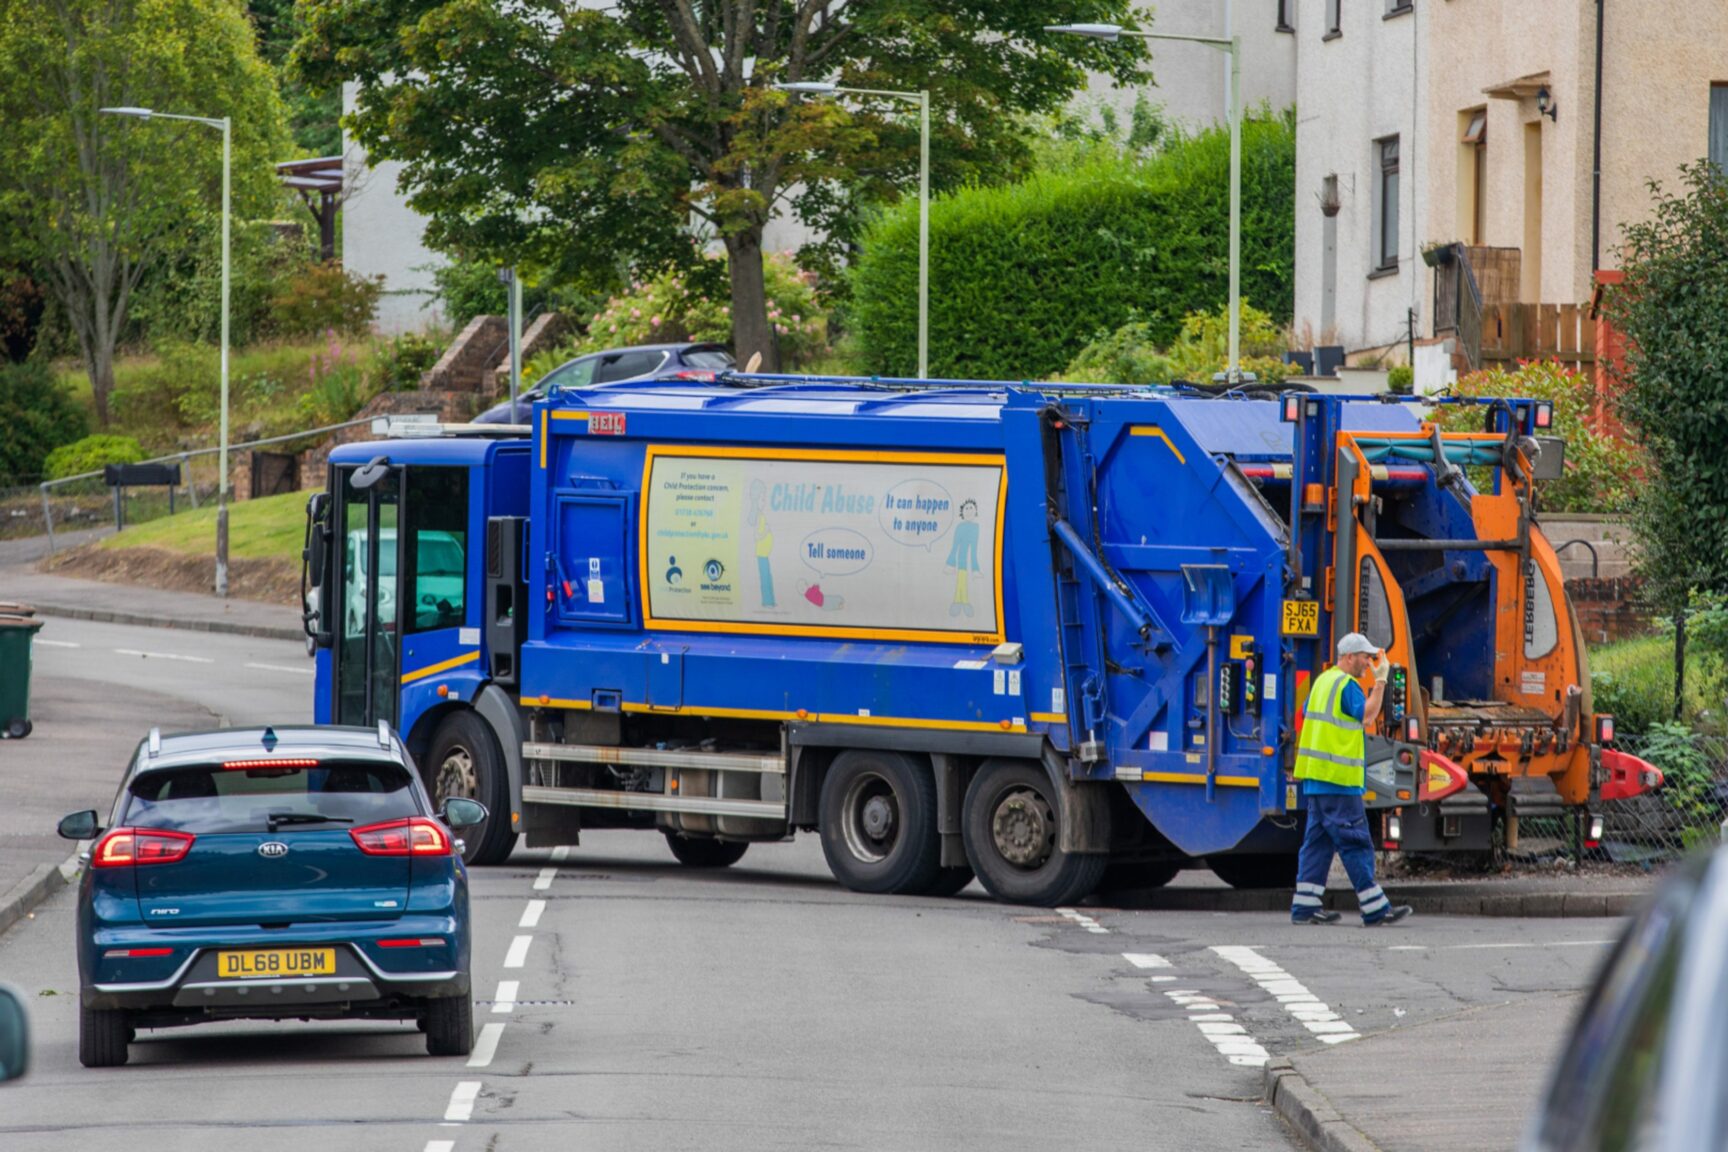 Perth and Kinross Council Advice on bin collections ahead of strike